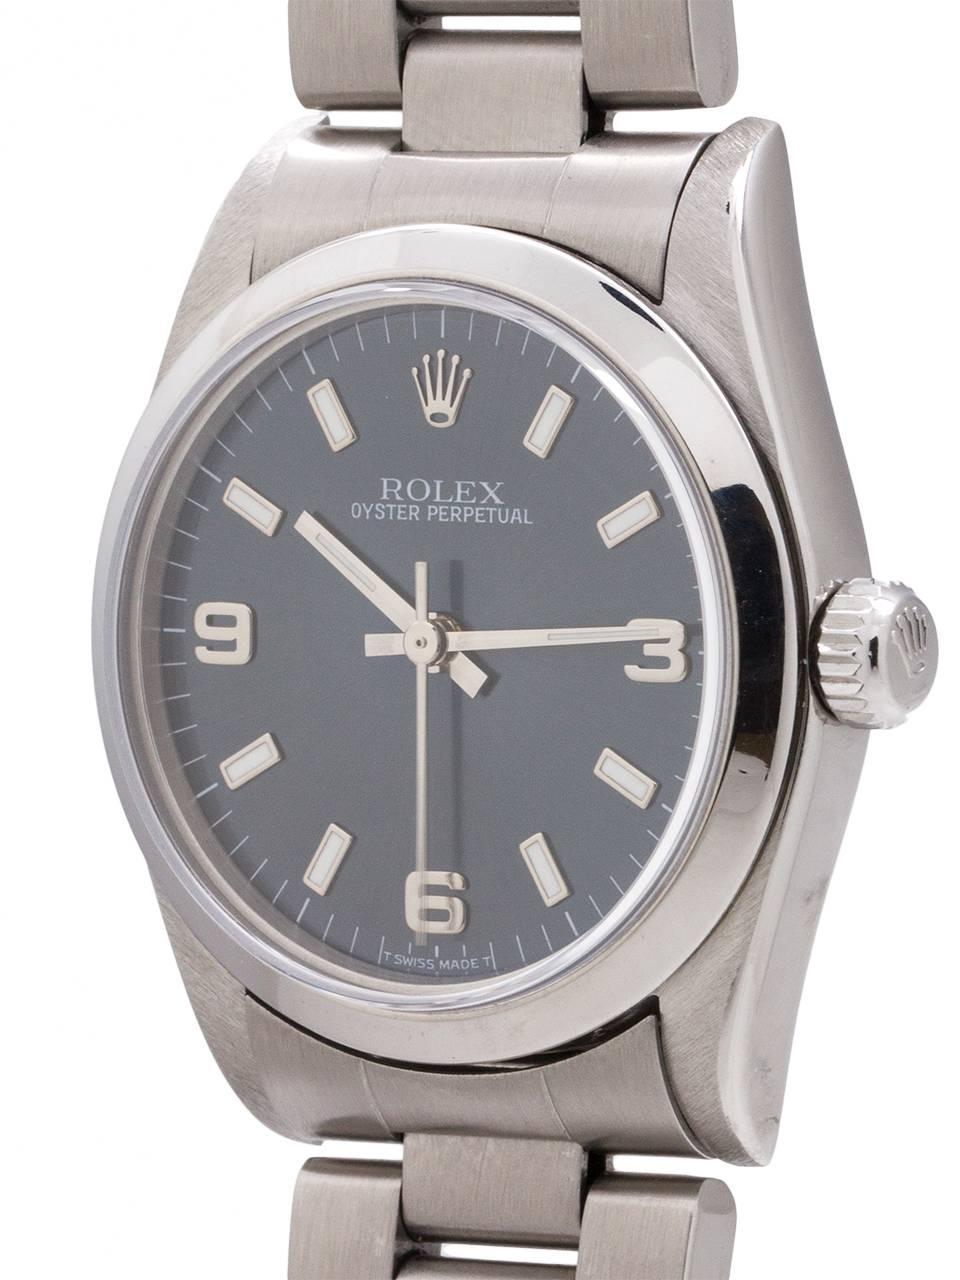 
Rolex Oyster Perpetual ref 67480 midsize model serial # U6 circa 1997. Featuring 31mm diameter midsize case, smooth bezel, sapphire crystal, and original blue Explorer style dial with luminous indexes and hands. Powered by self winding movement